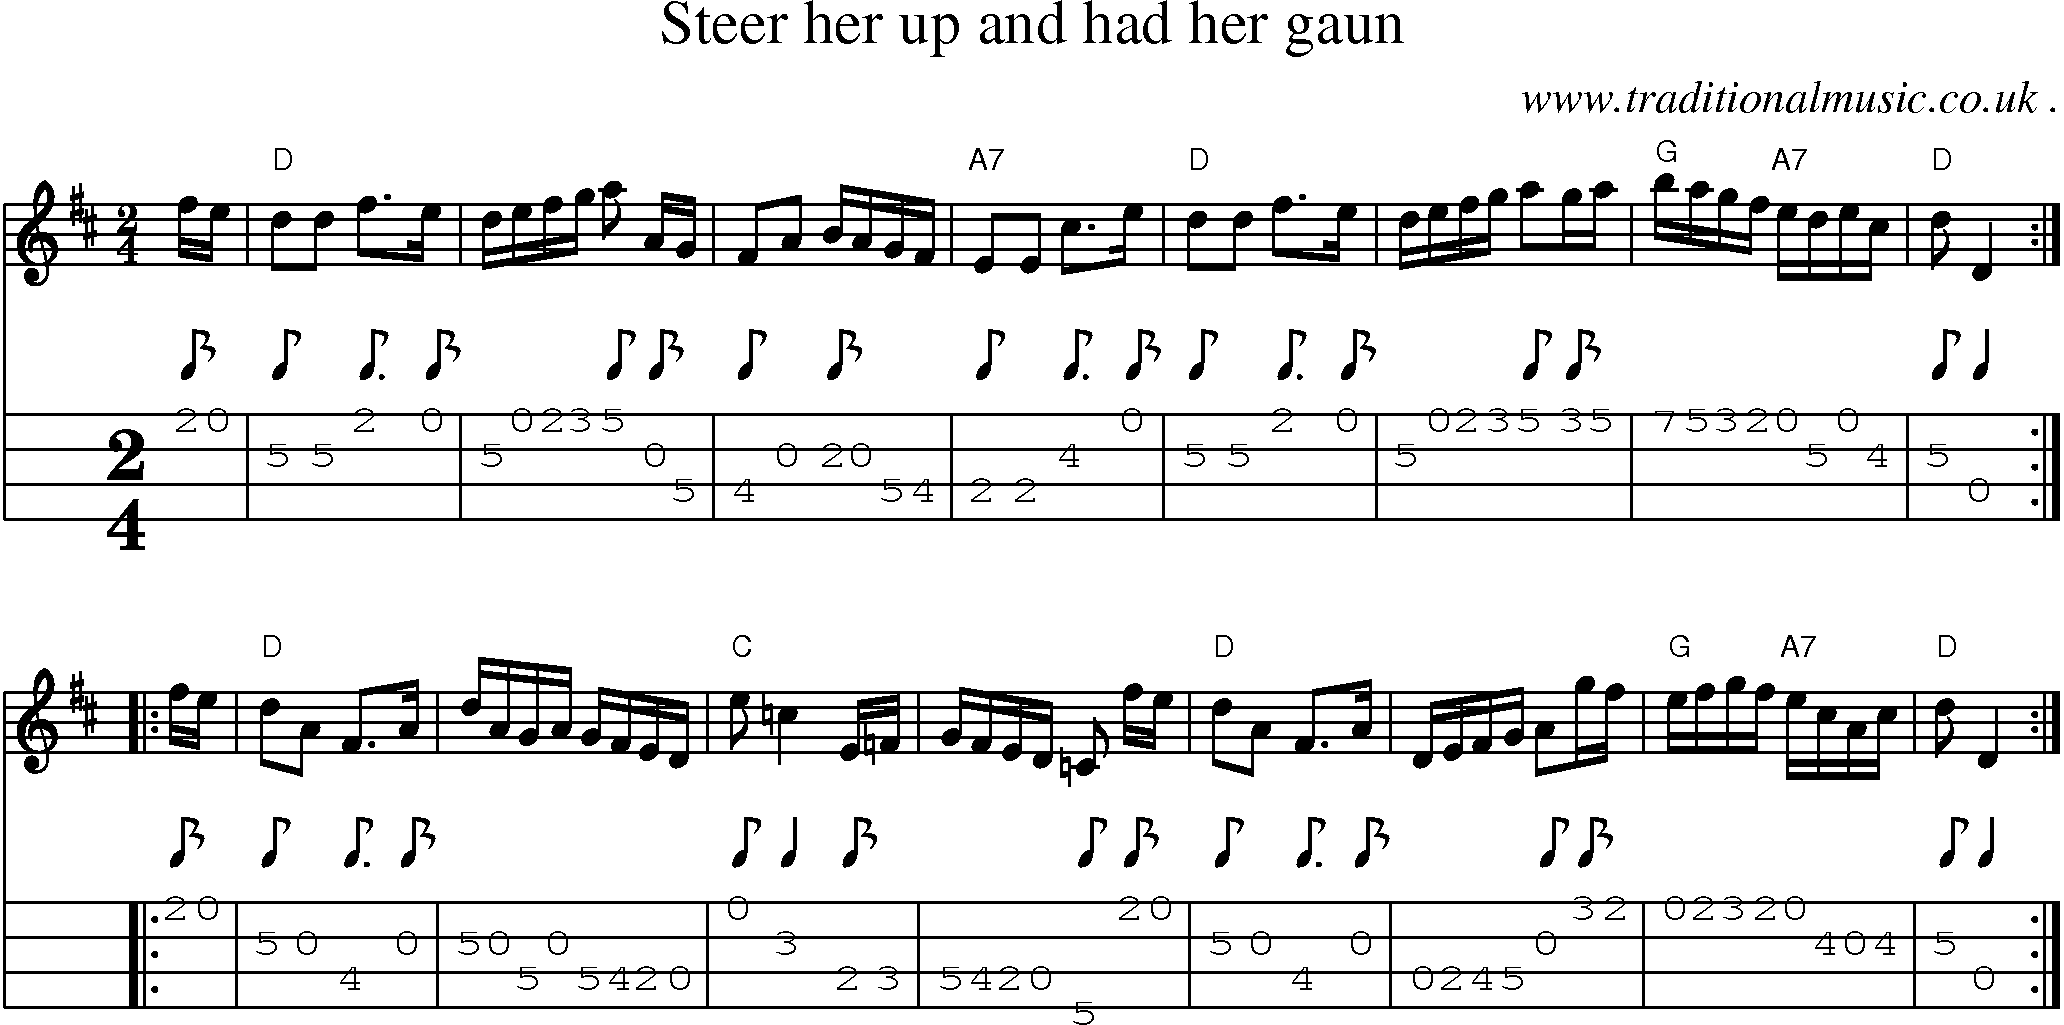 Sheet-music  score, Chords and Mandolin Tabs for Steer Her Up And Had Her Gaun